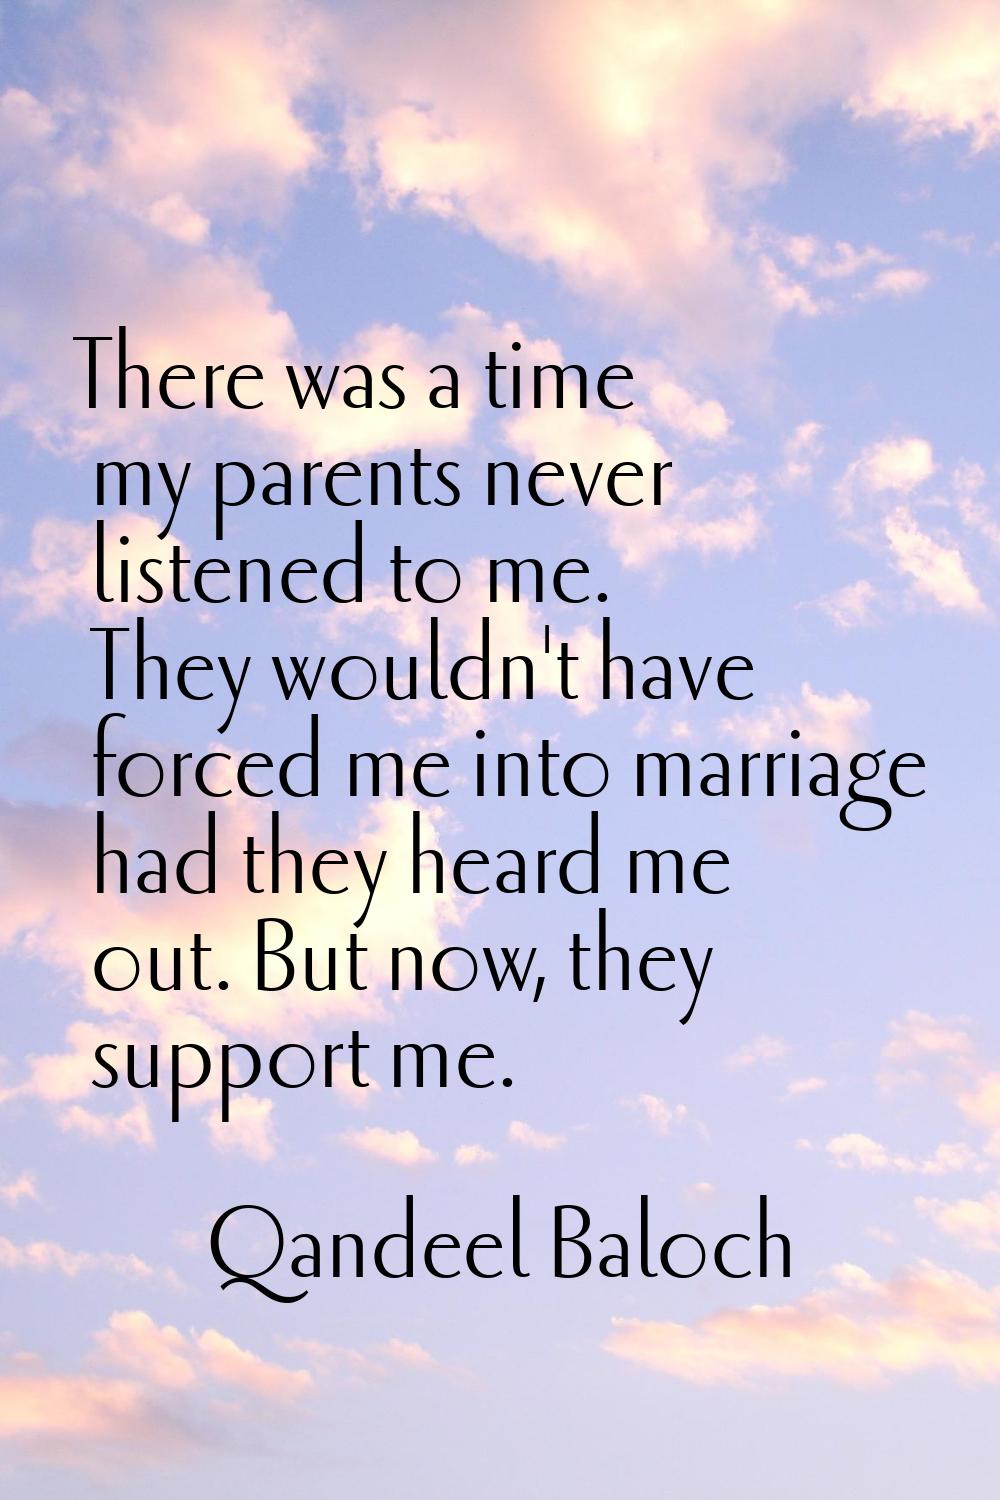 There was a time my parents never listened to me. They wouldn't have forced me into marriage had th